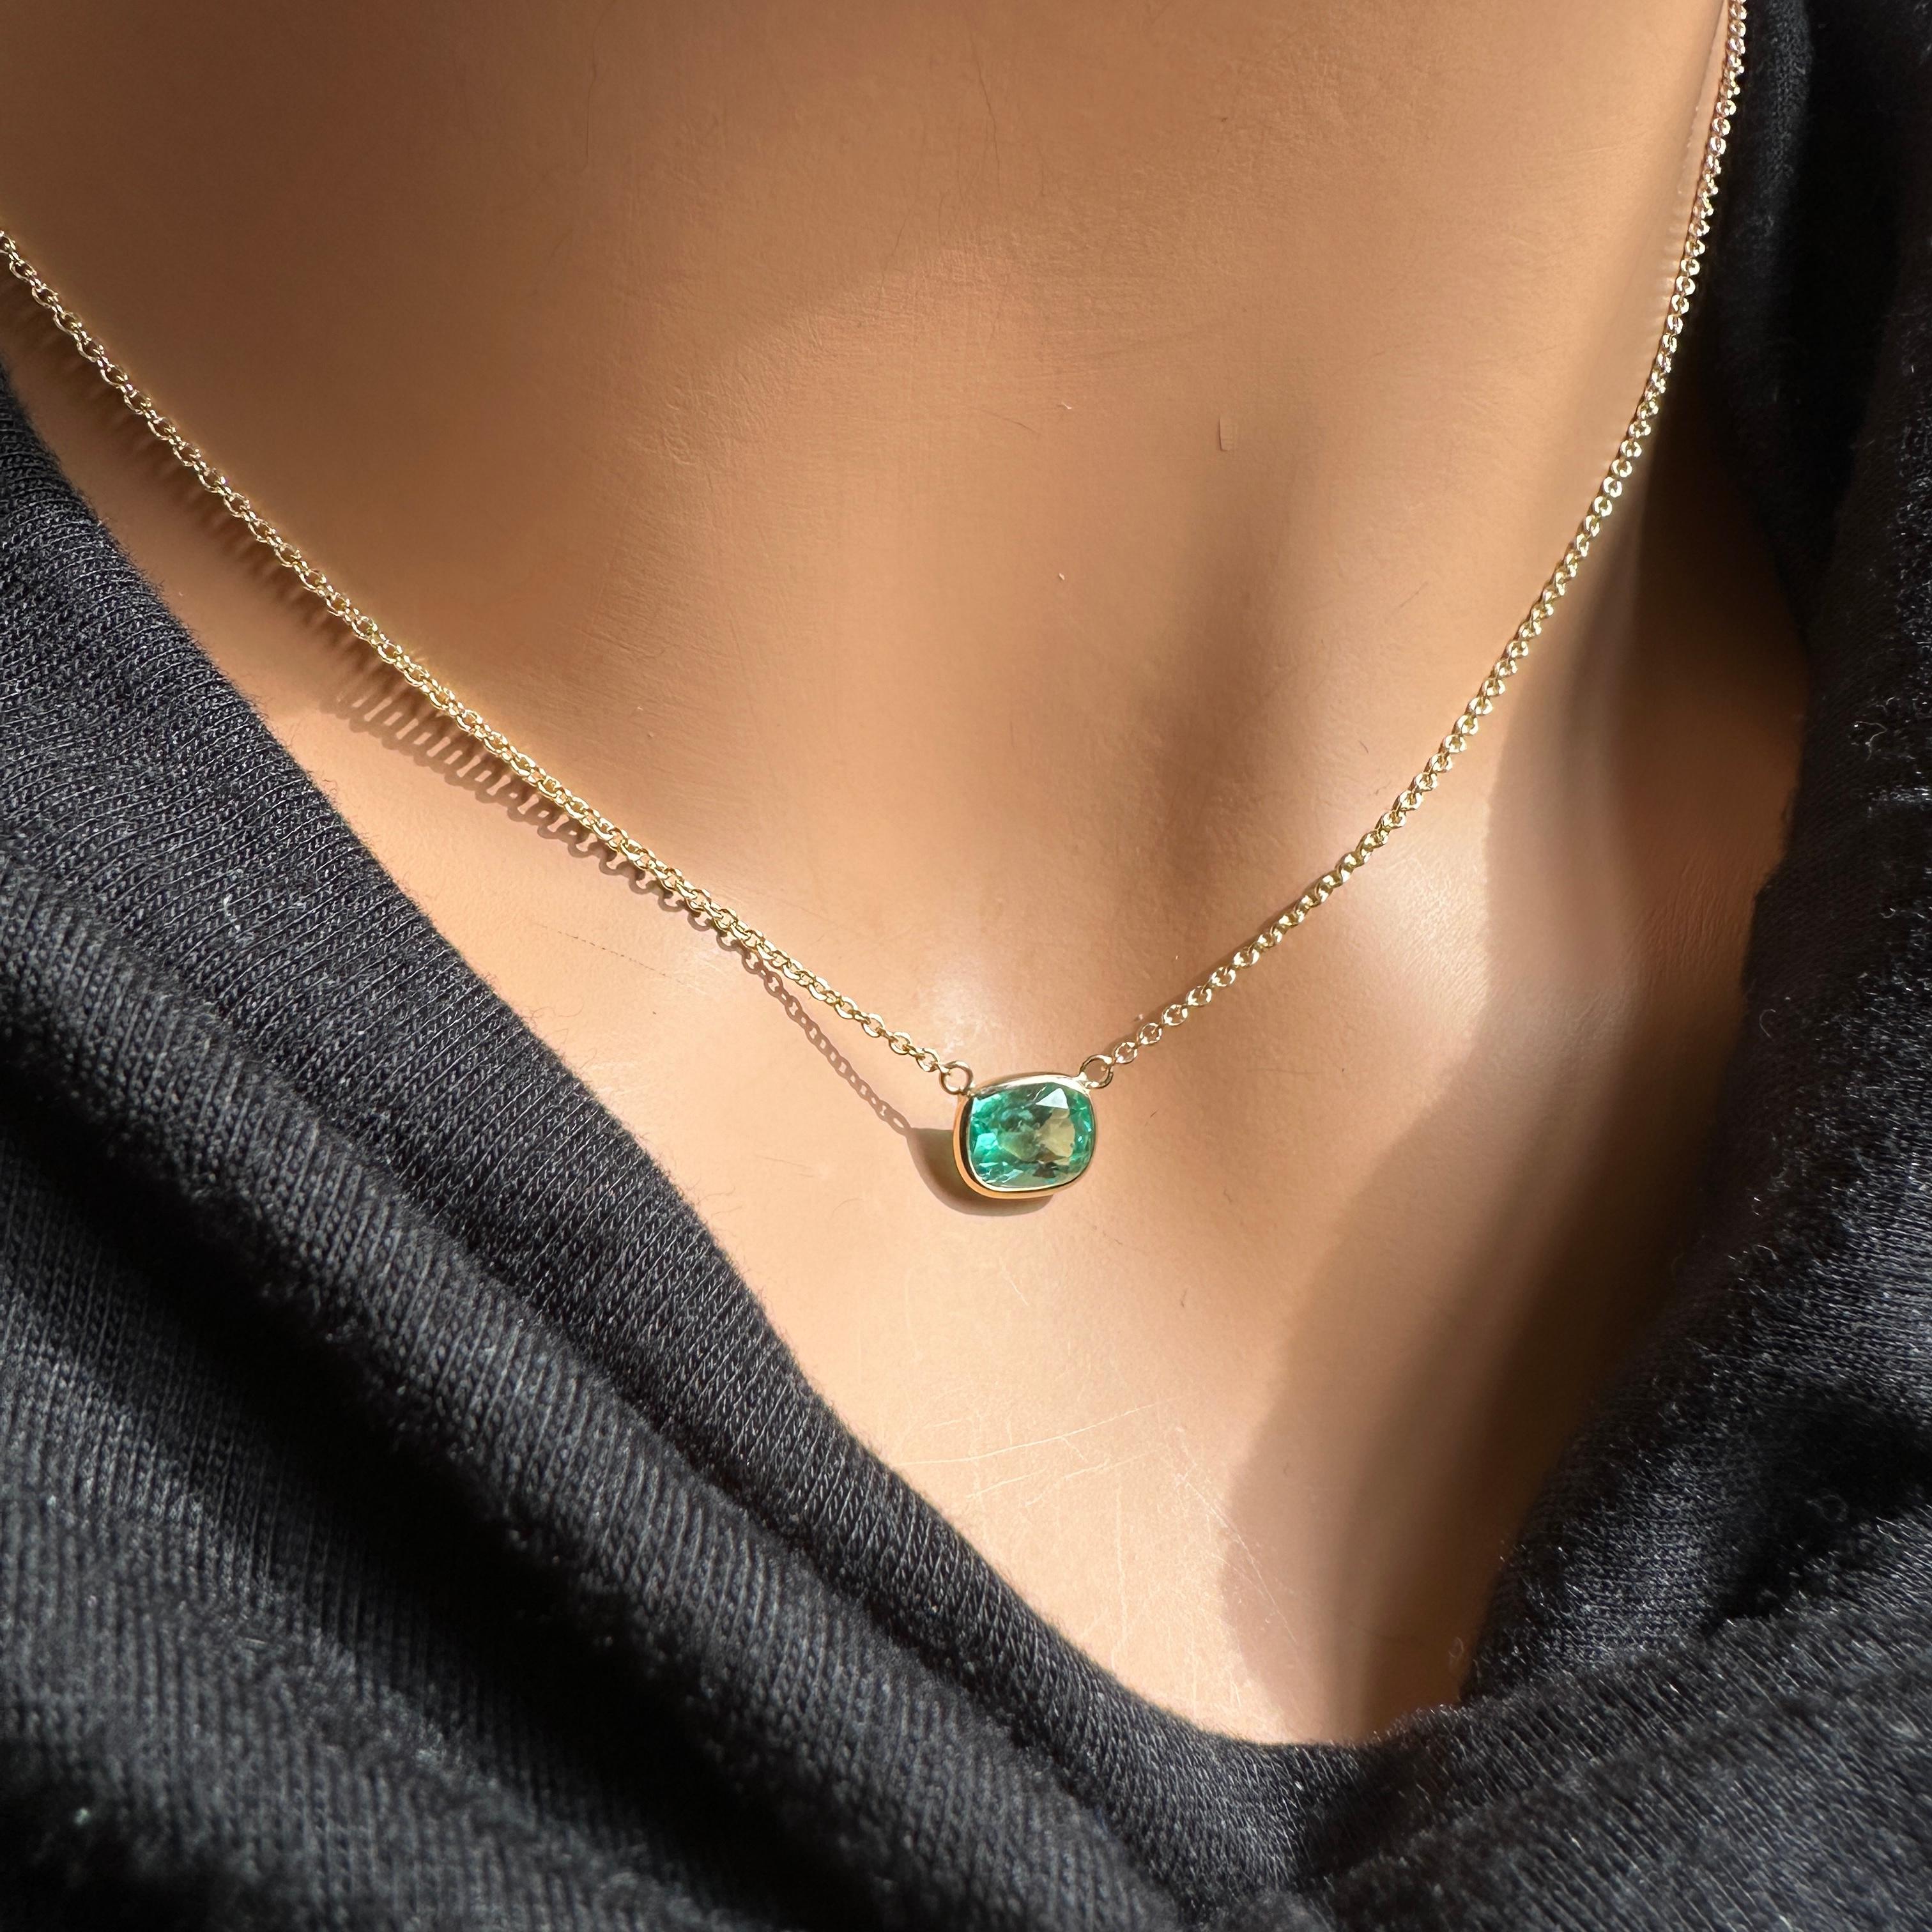 Contemporary 1.41 Carat Weight Green Emerald Long Cushion Cut Solitaire Necklace in 14k YG For Sale